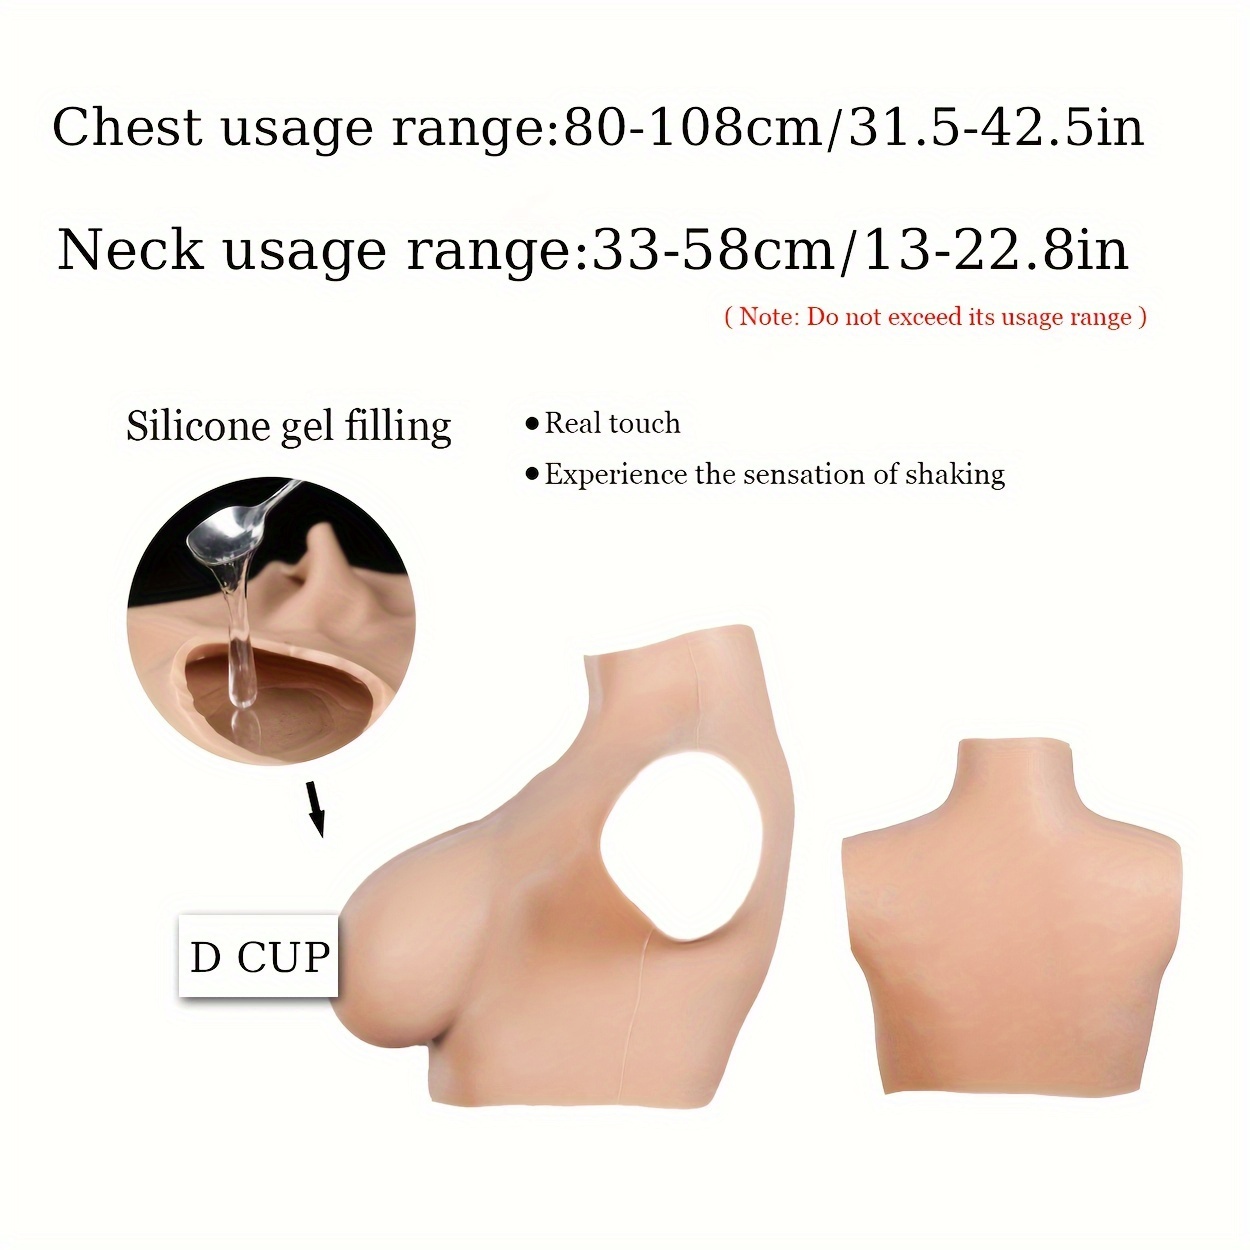 Soft Silicone Breast Forms High Collar Style Boobs Enhancer Fake